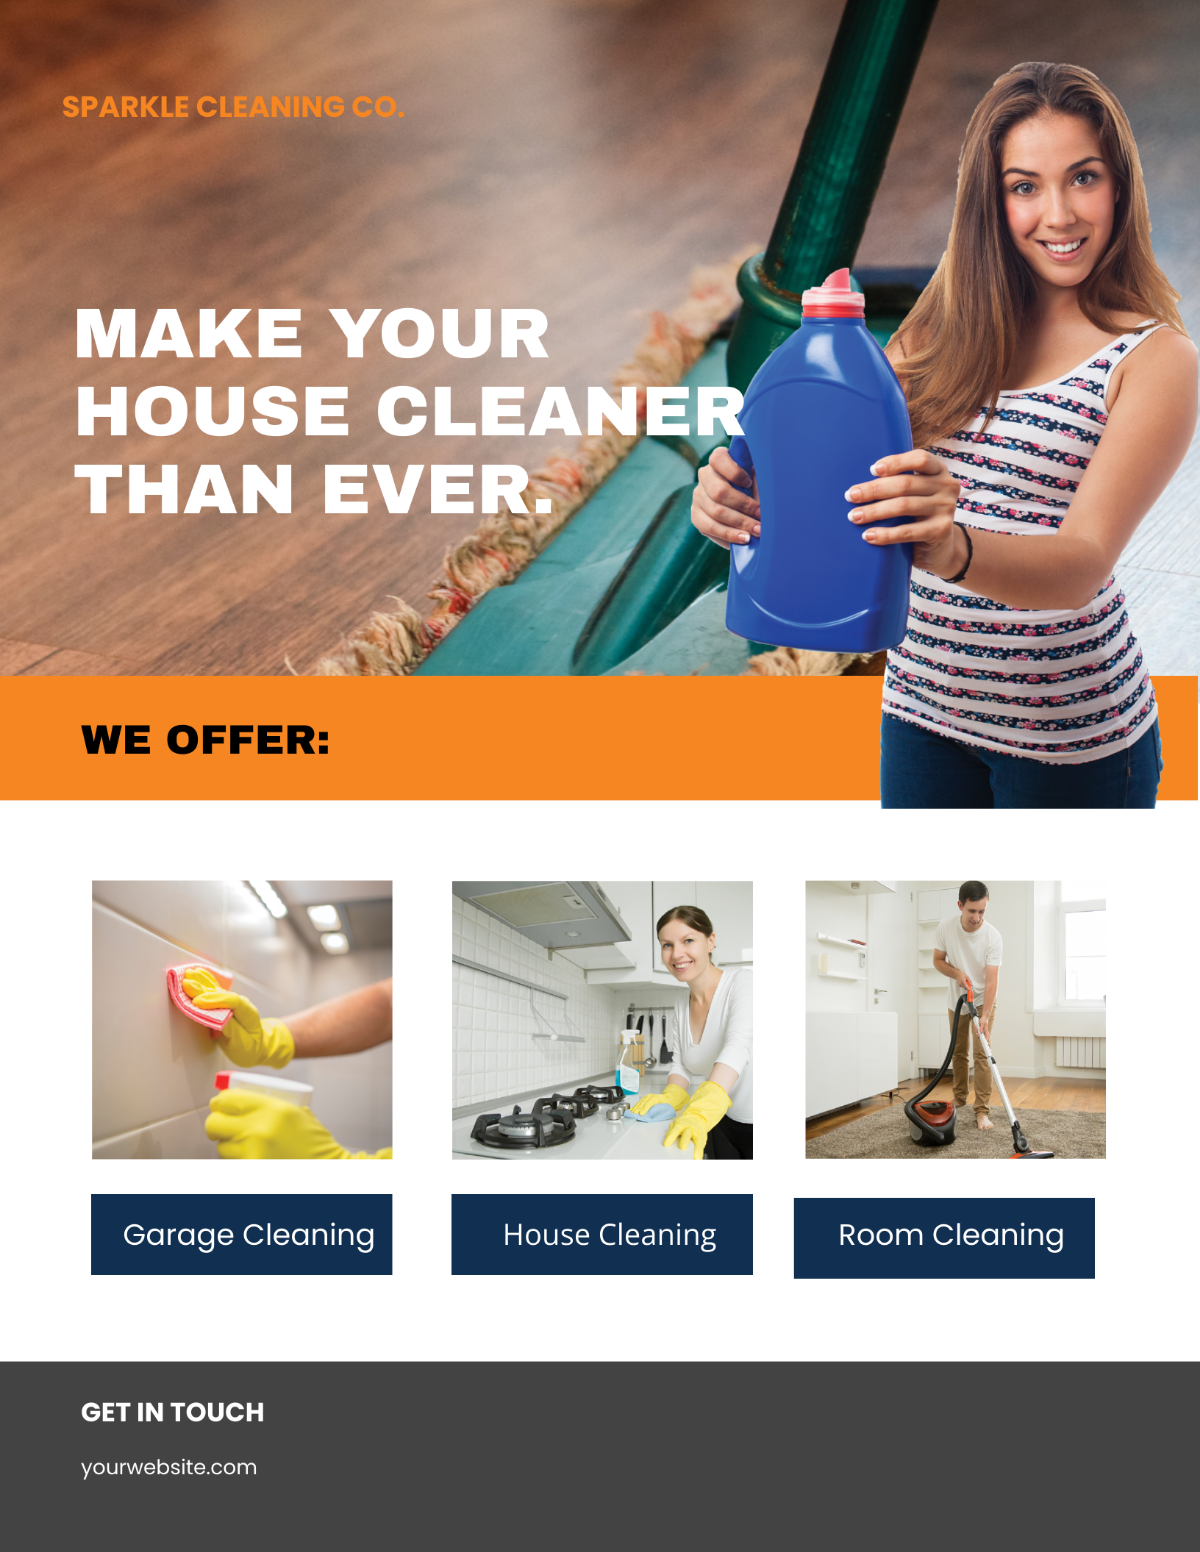 Cleaning Services Company Flyer Template